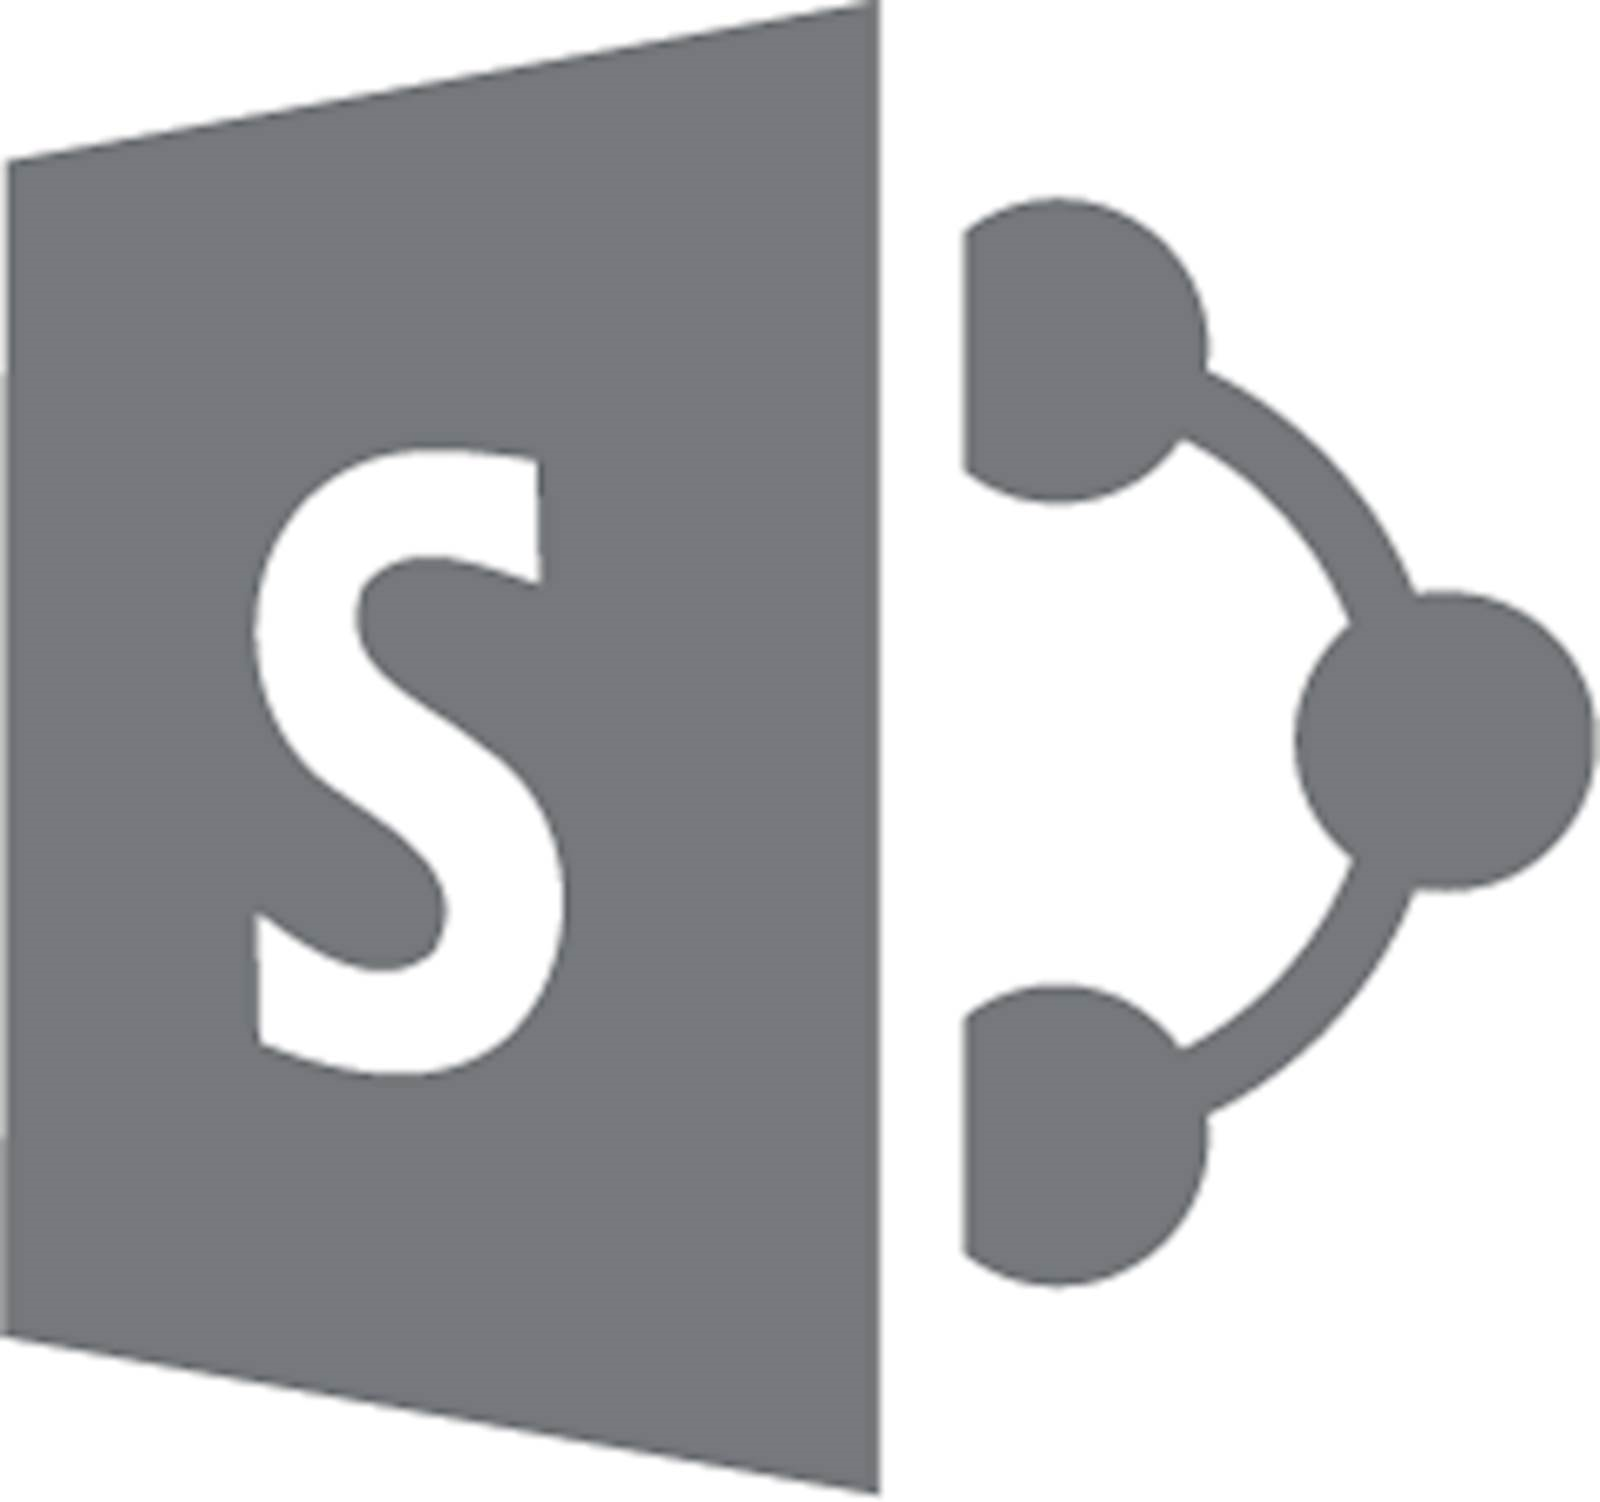 Drivve Image Scan to SharePoint Integration Graphic